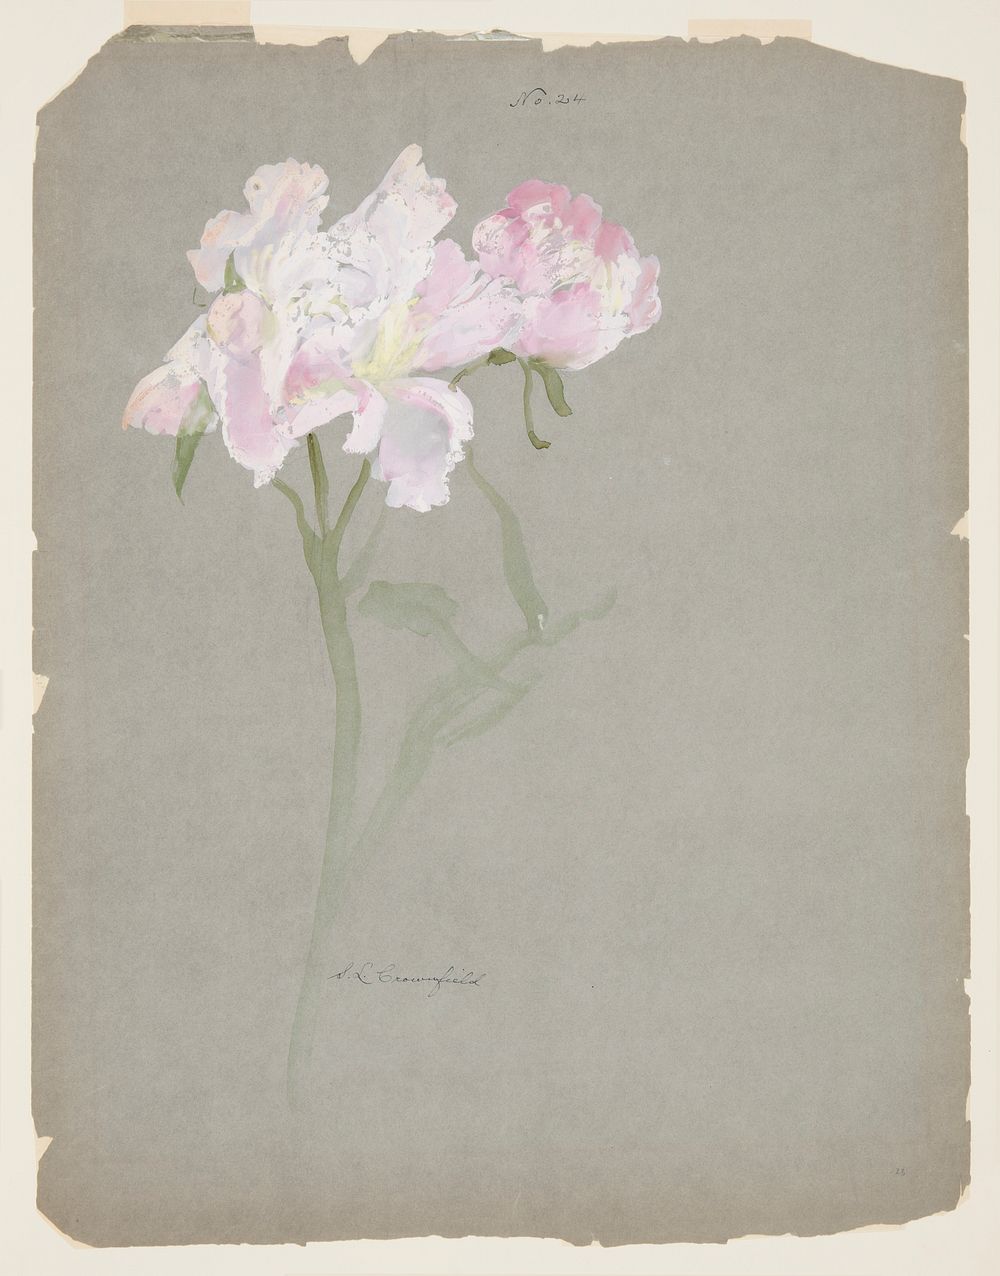 Study of Peony Stalk with Blossoms, Sophia L. Crownfield